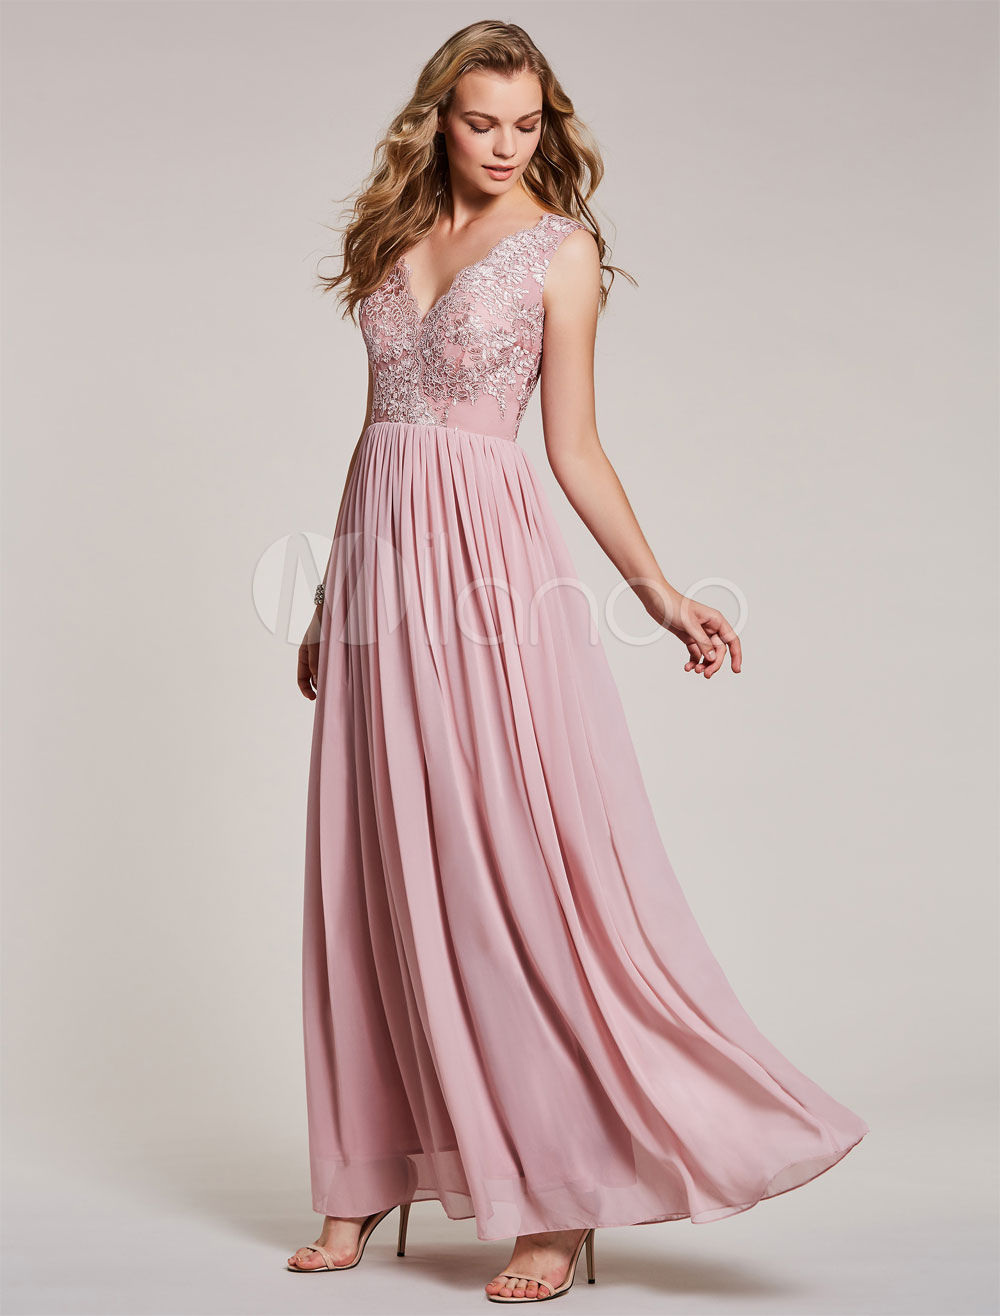 Long Prom Dresses Chiffon Lace Applique V Neck Cameo Pink Sleeveless Floor Length Formal Evening Gowns (Wedding Cheap Party Dress) photo